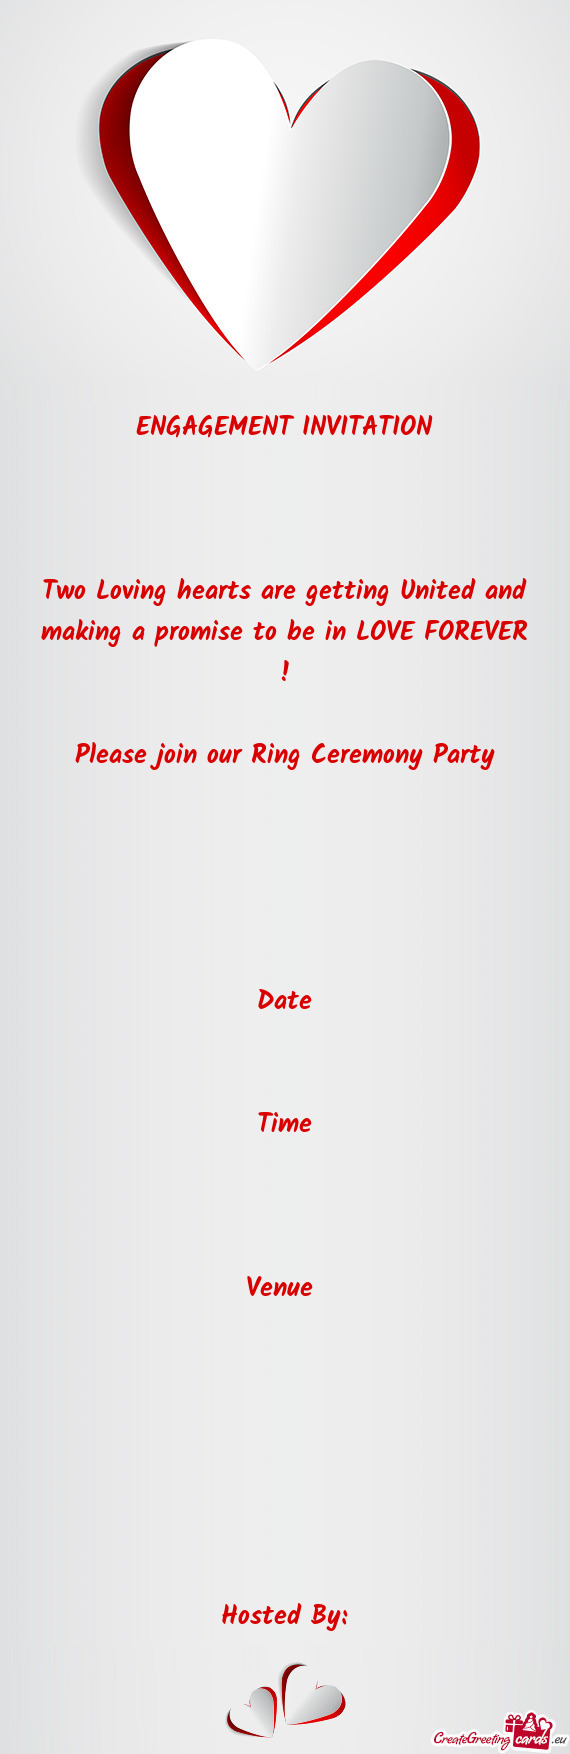 E FOREVER !
 
 Please join our Ring Ceremony Party
 
 
 
 
 
 Date
 
 
 Time
 
 
 
 Venue